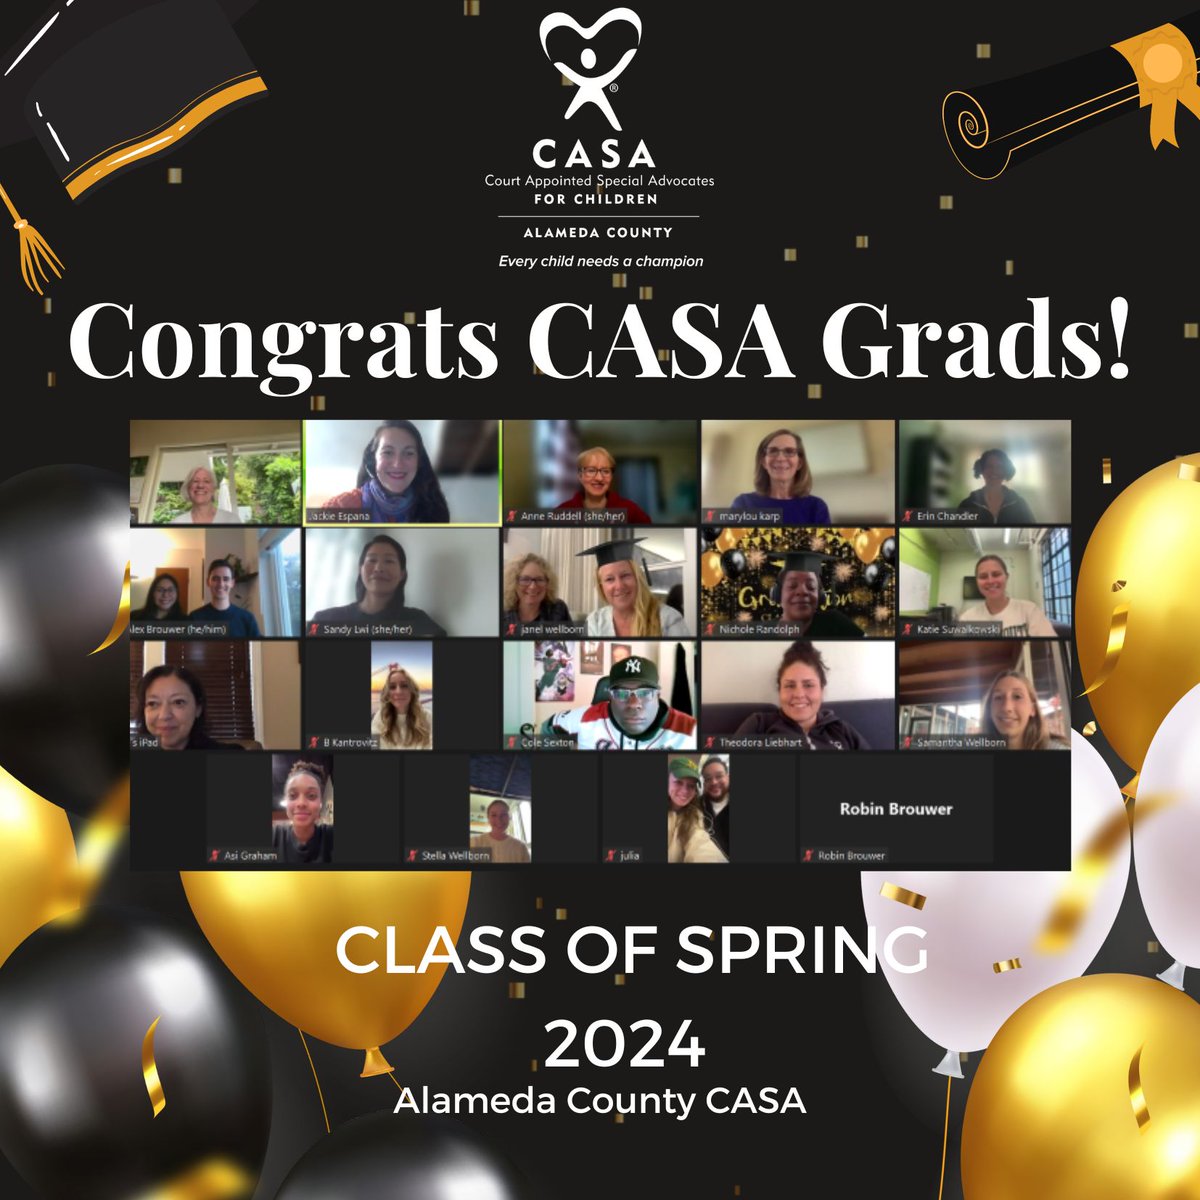 Congratulations to our Newest Class of Trained Volunteers here at Alameda County CASA! 🎉❤️👏😊

#AlamedaCountyCASA #CASAVolunteers #CongratsCASAGrads #NationalVolunteersWeek #EarlySpring2024